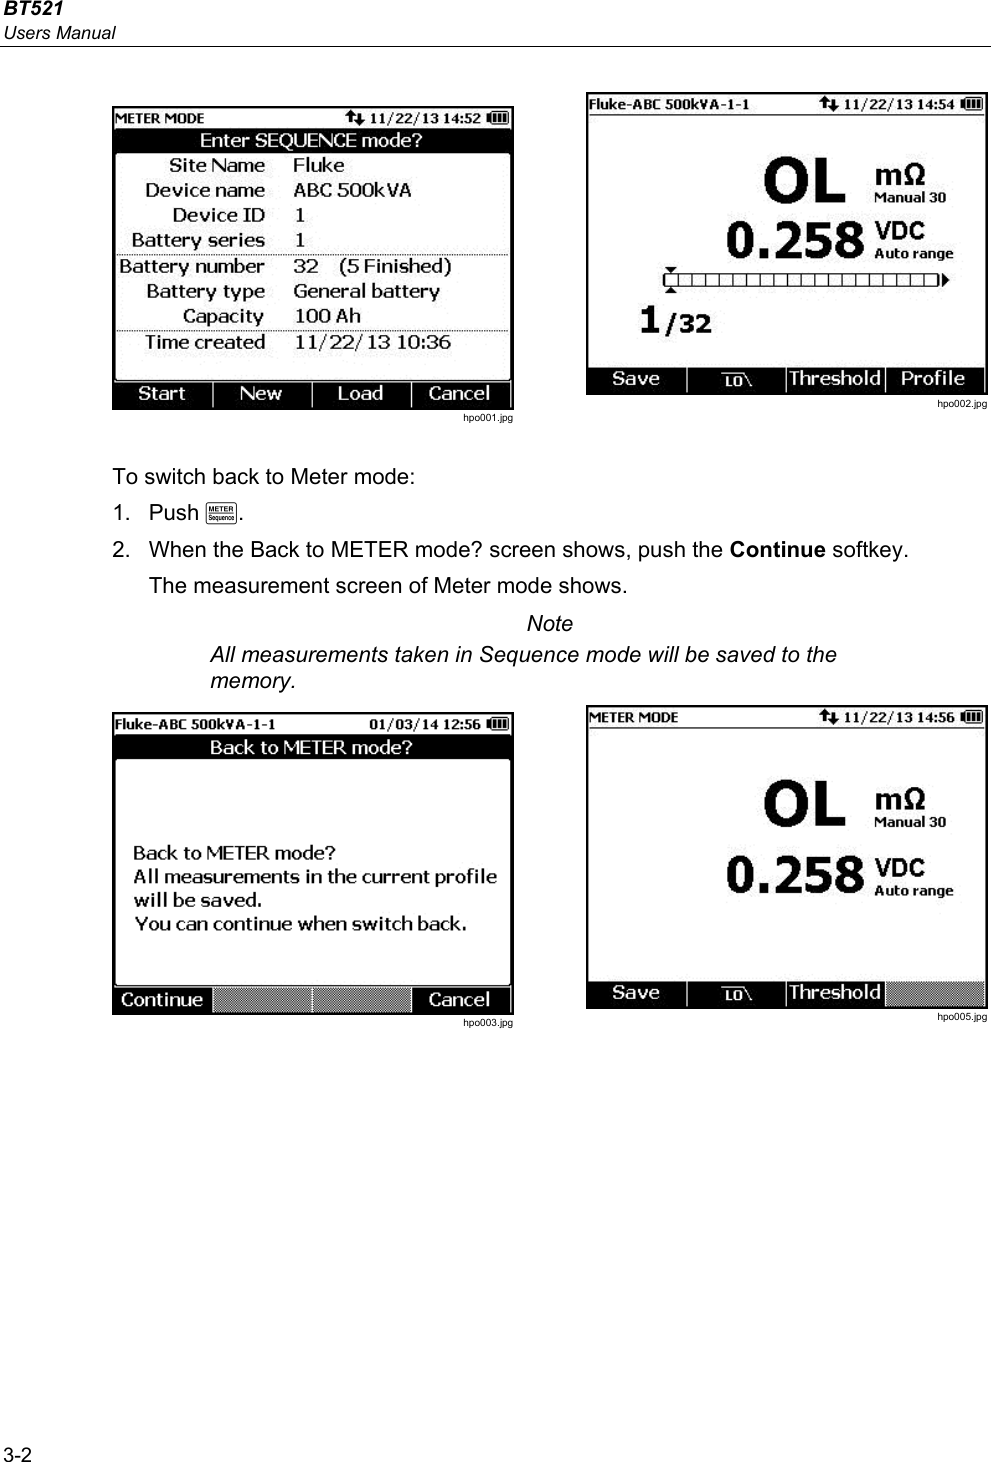 BT521 Users Manual 3-2  hpo001.jpg  hpo002.jpg To switch back to Meter mode: 1. Push M. 2.  When the Back to METER mode? screen shows, push the Continue softkey. The measurement screen of Meter mode shows.  Note All measurements taken in Sequence mode will be saved to the memory. hpo003.jpg  hpo005.jpg 